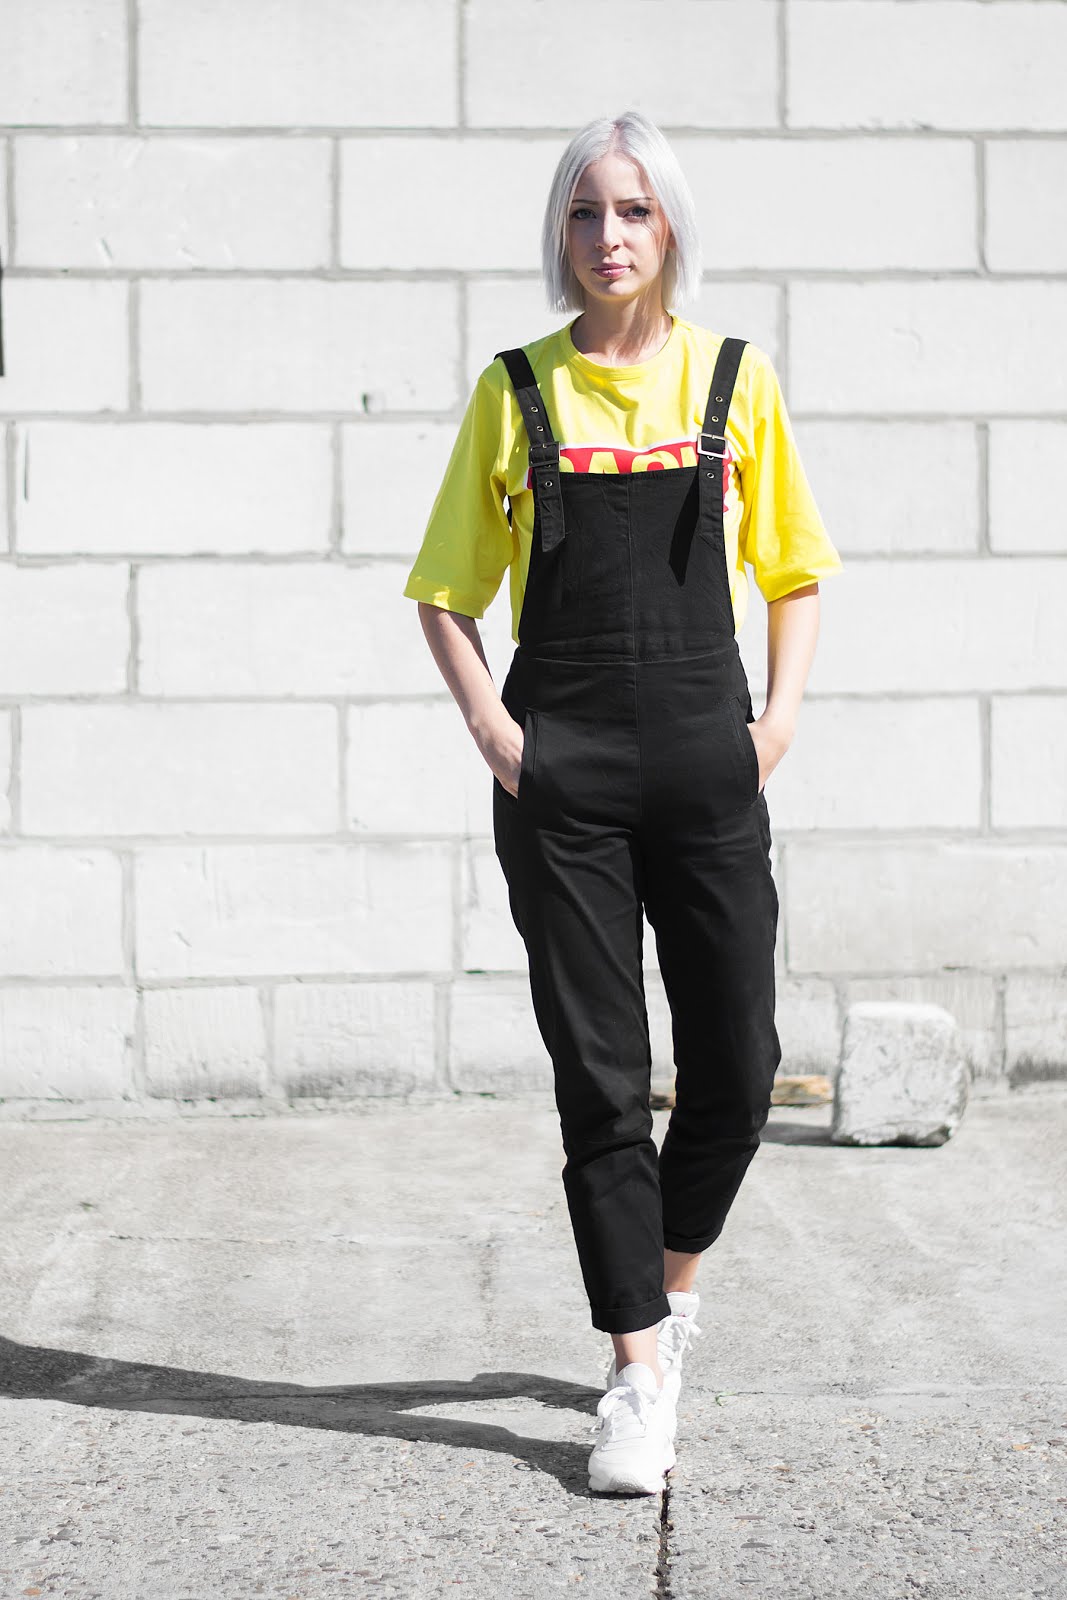 Asos, black dungarees, 90's, Yellow, slogan t-shirt, BACK, reebok classic sneakers, outfit, minimalist